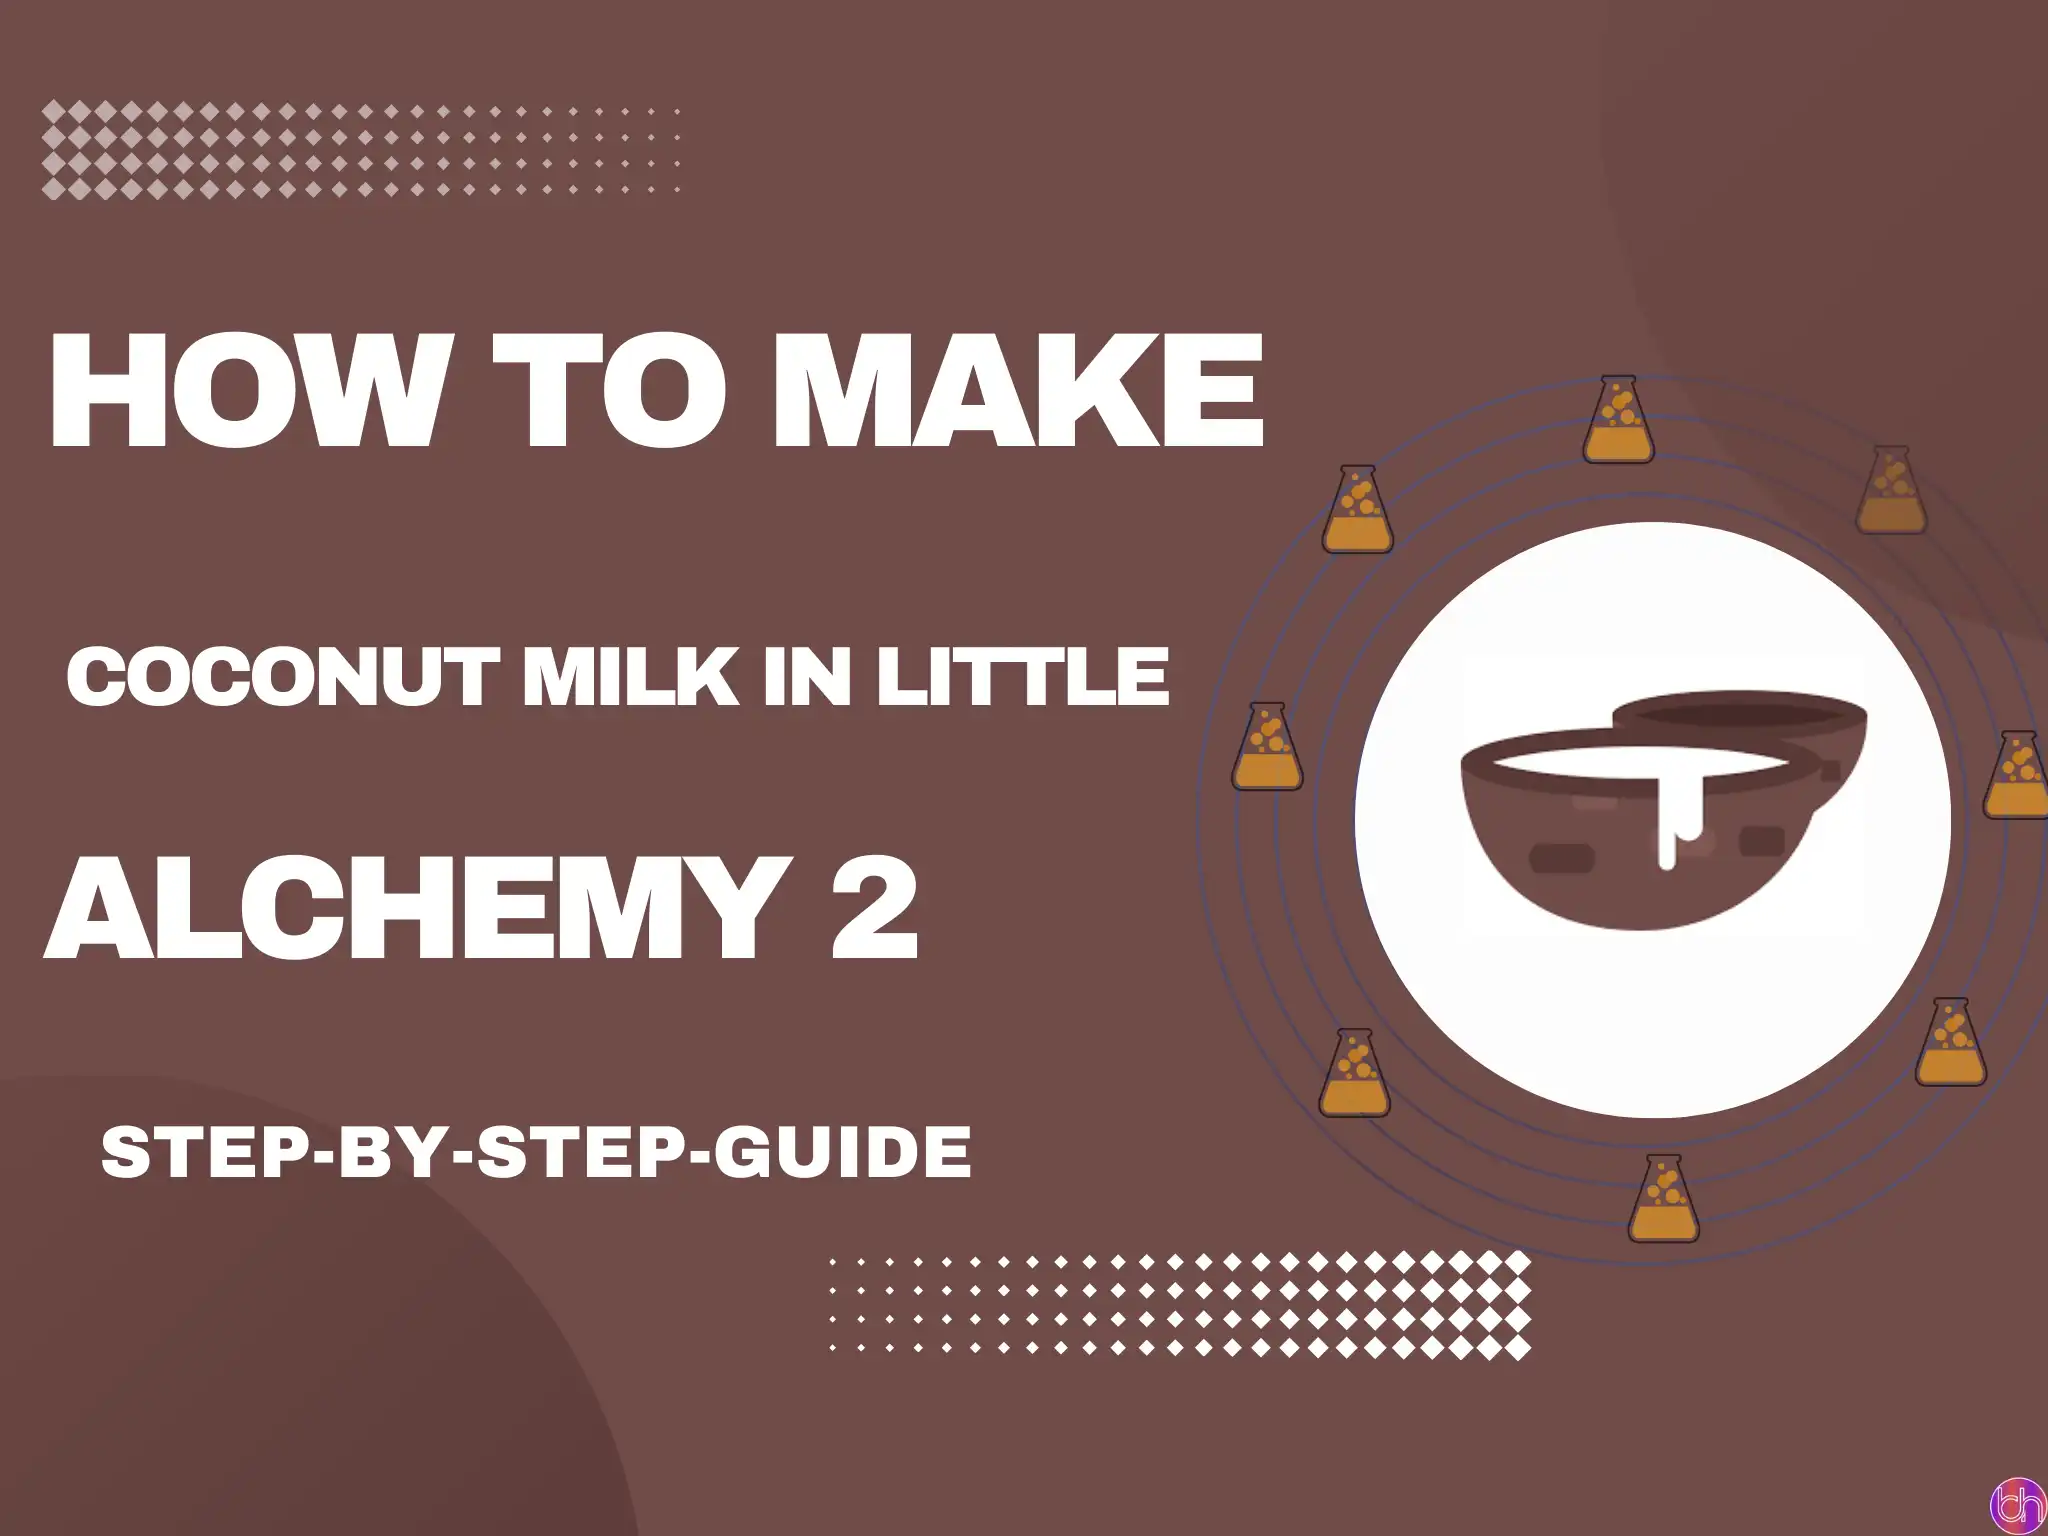 How to make Coconut Milk in Little Alchemy 2